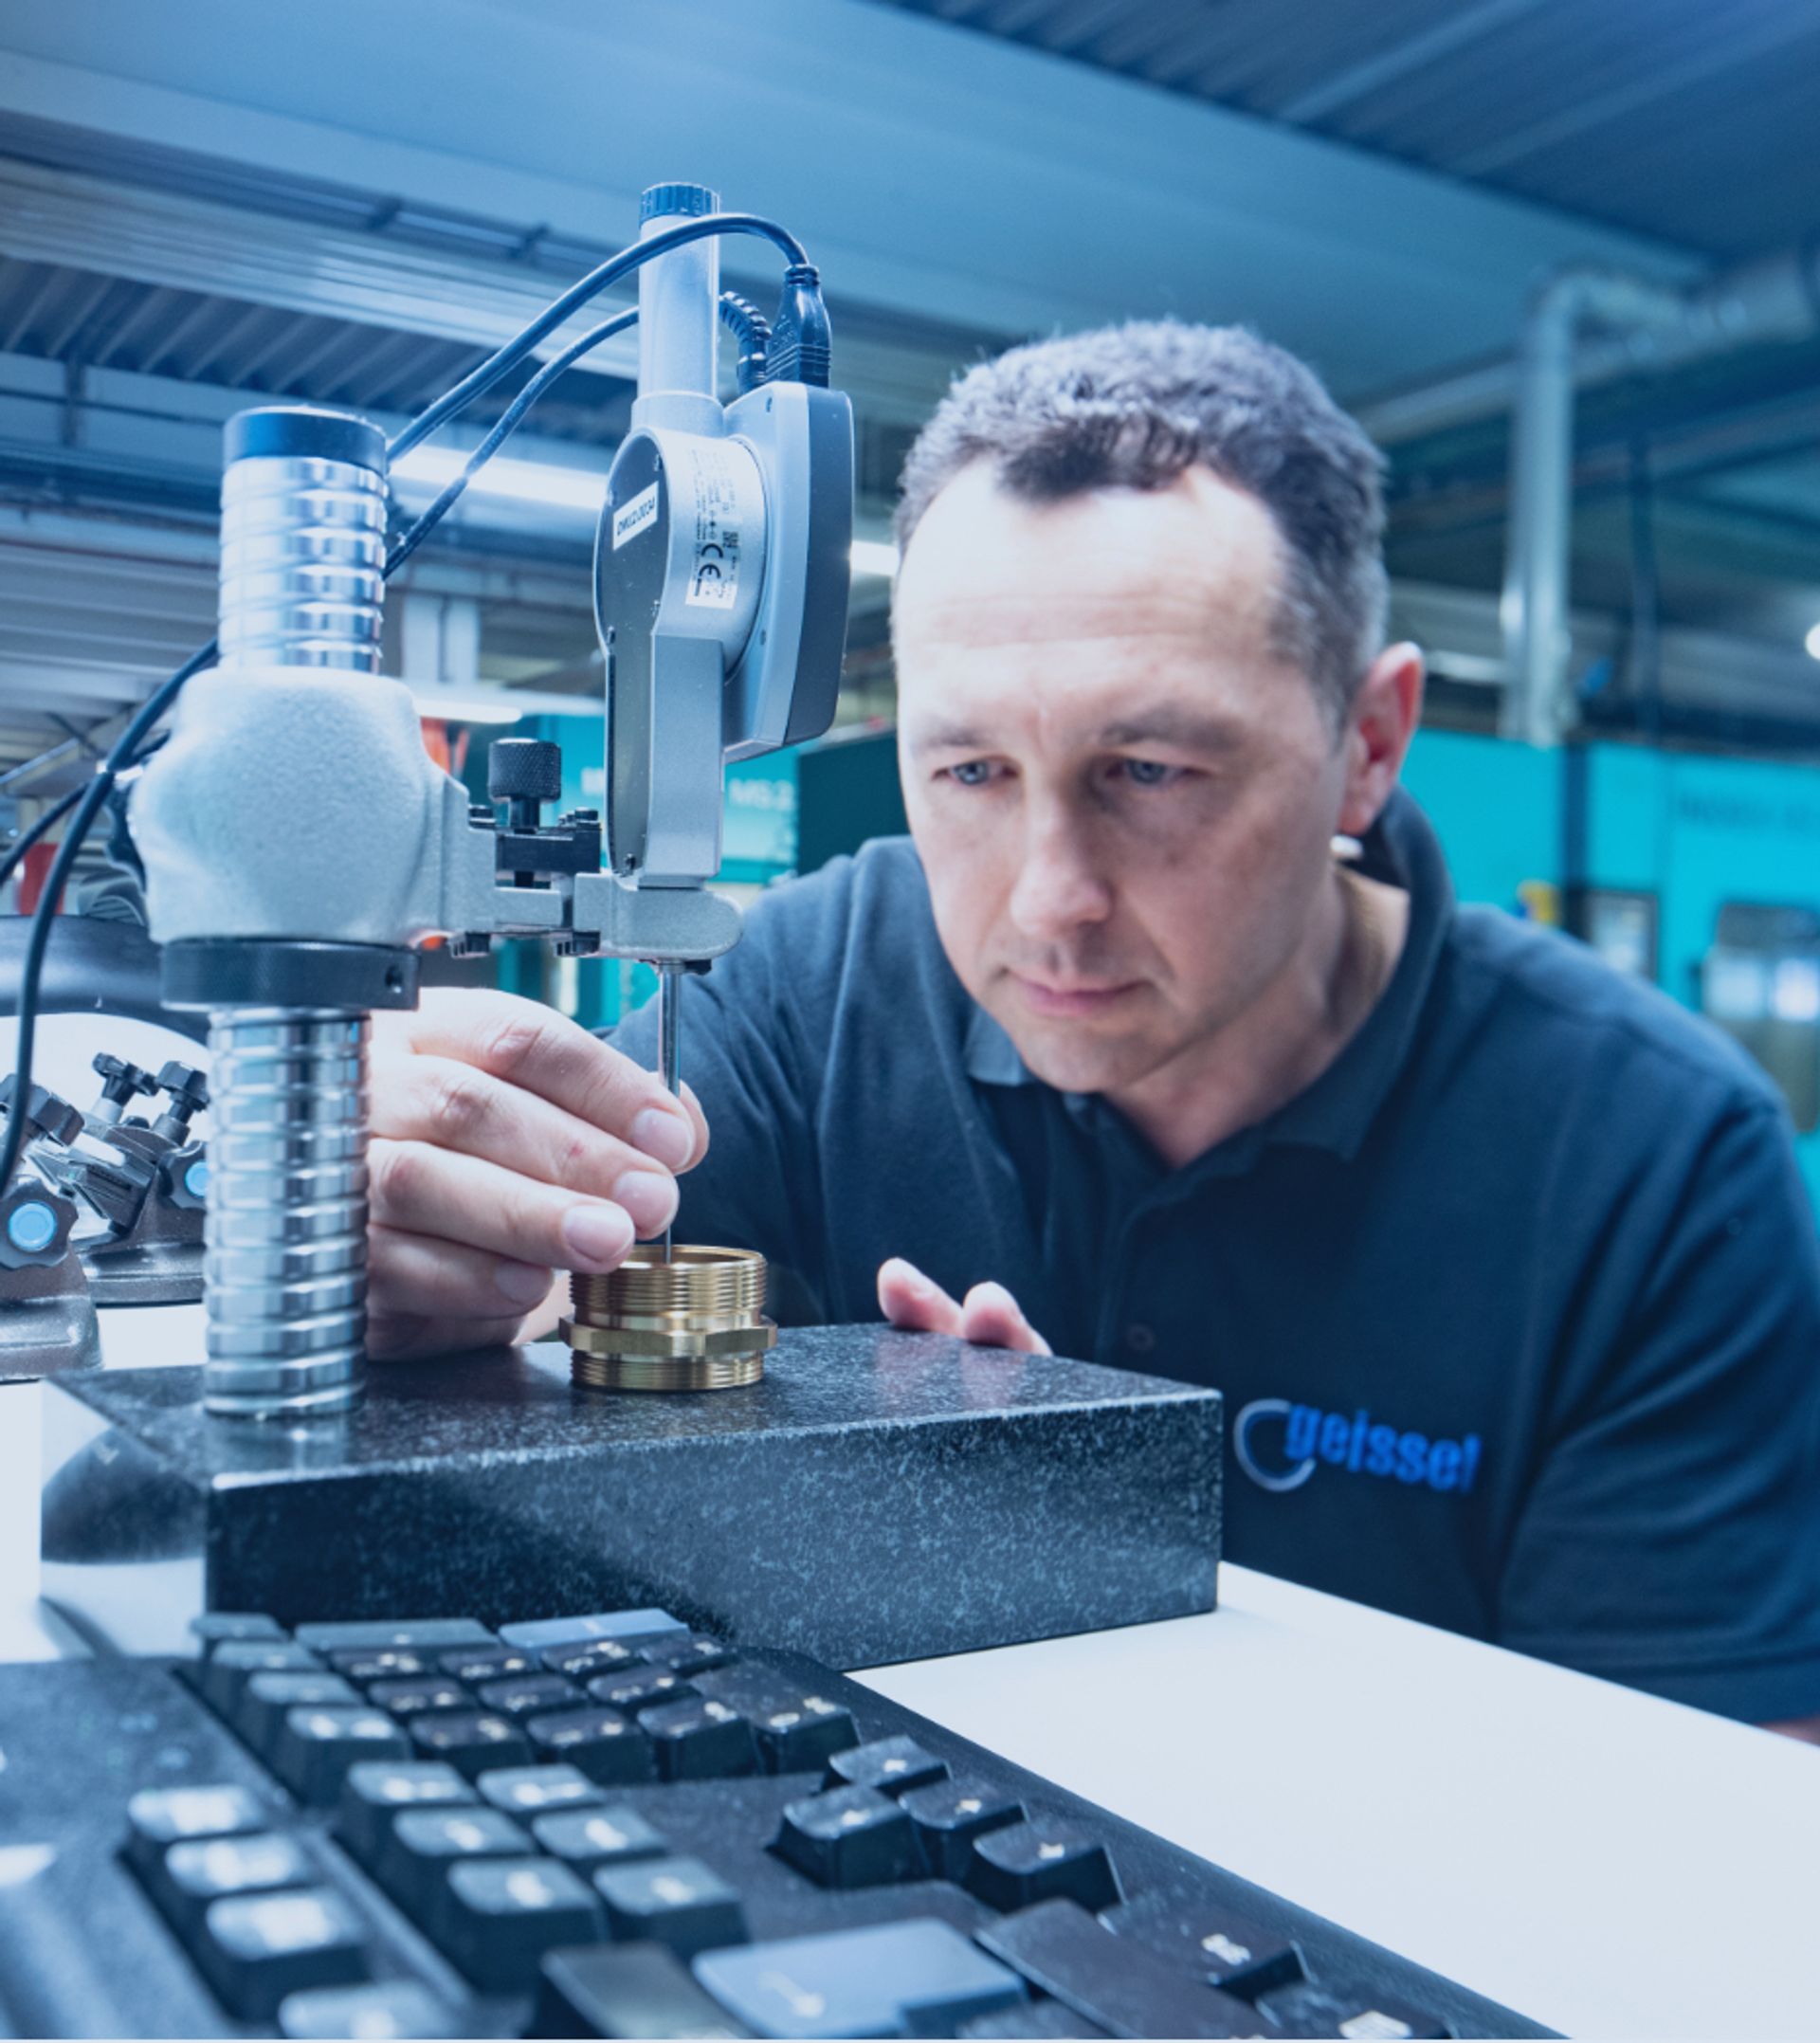 A quality control employee measures the manufacturing tolerances of a turned part